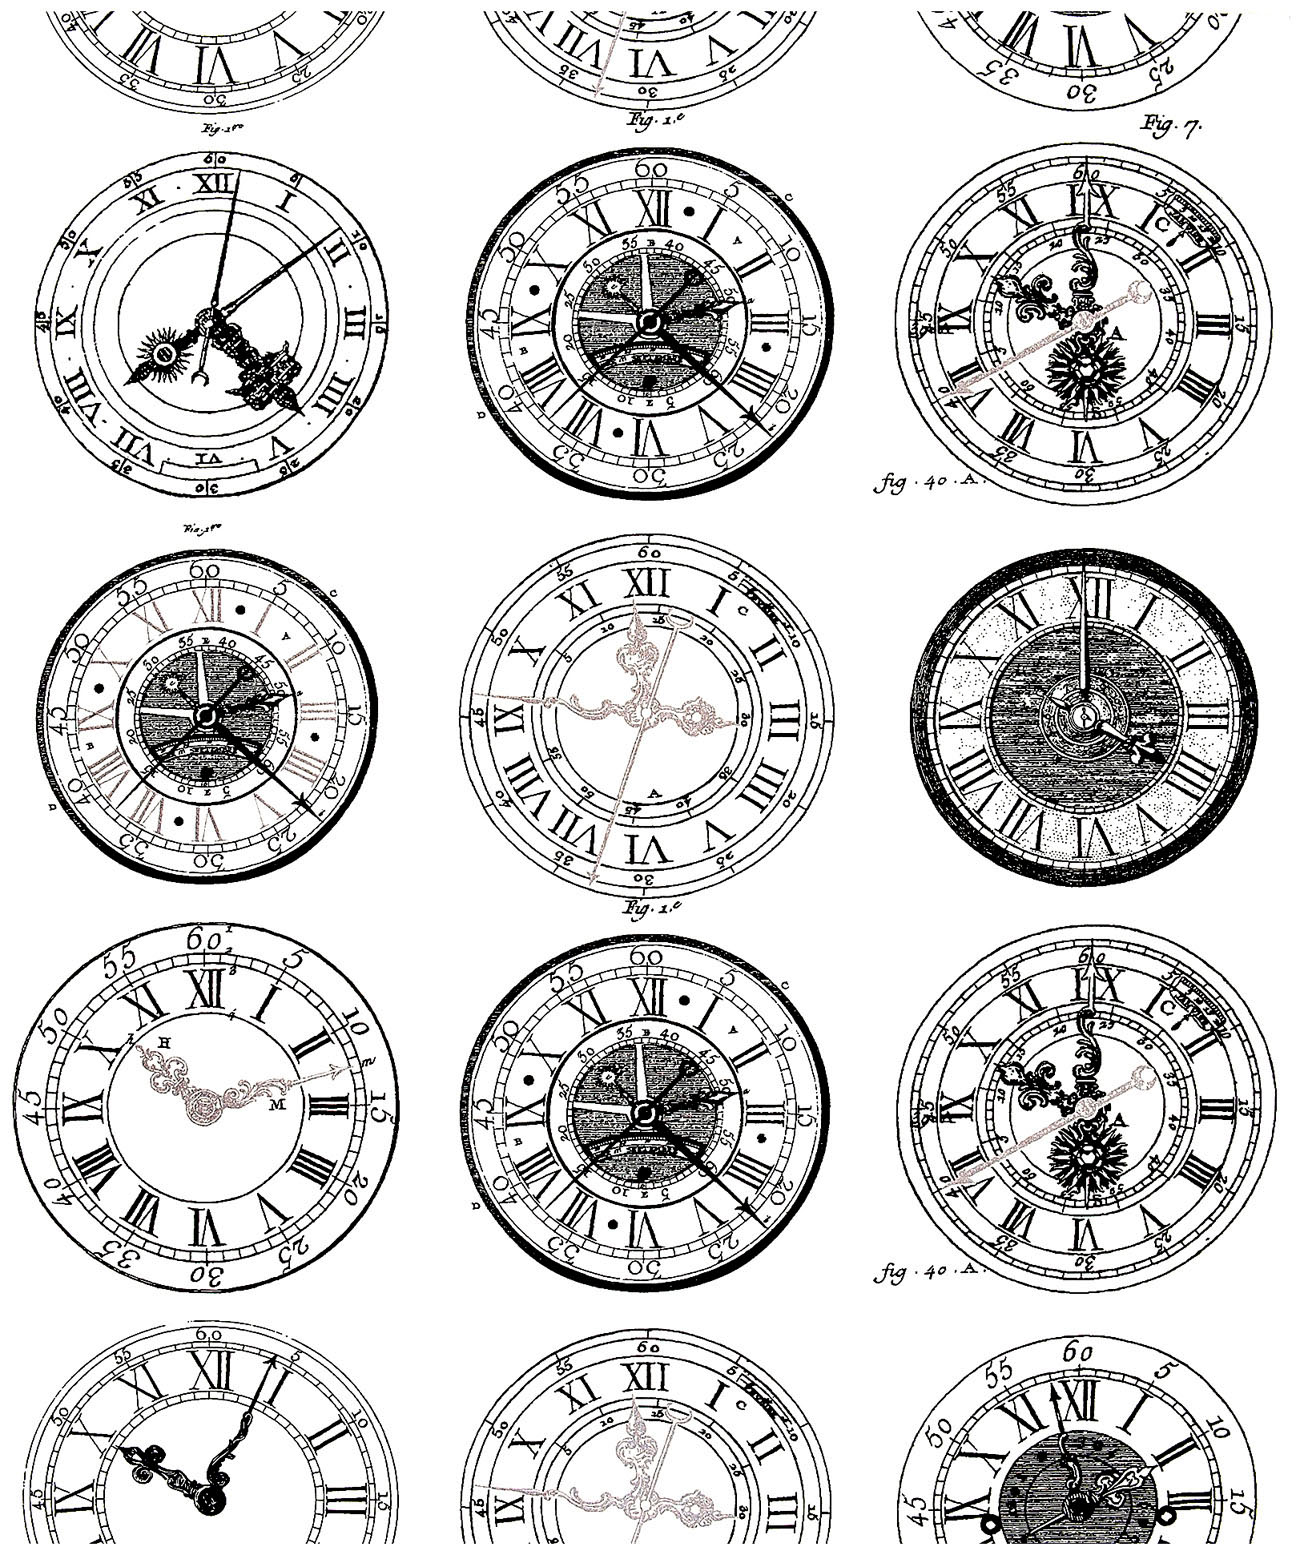 Various styles of watches dating from the 19th and 20th century